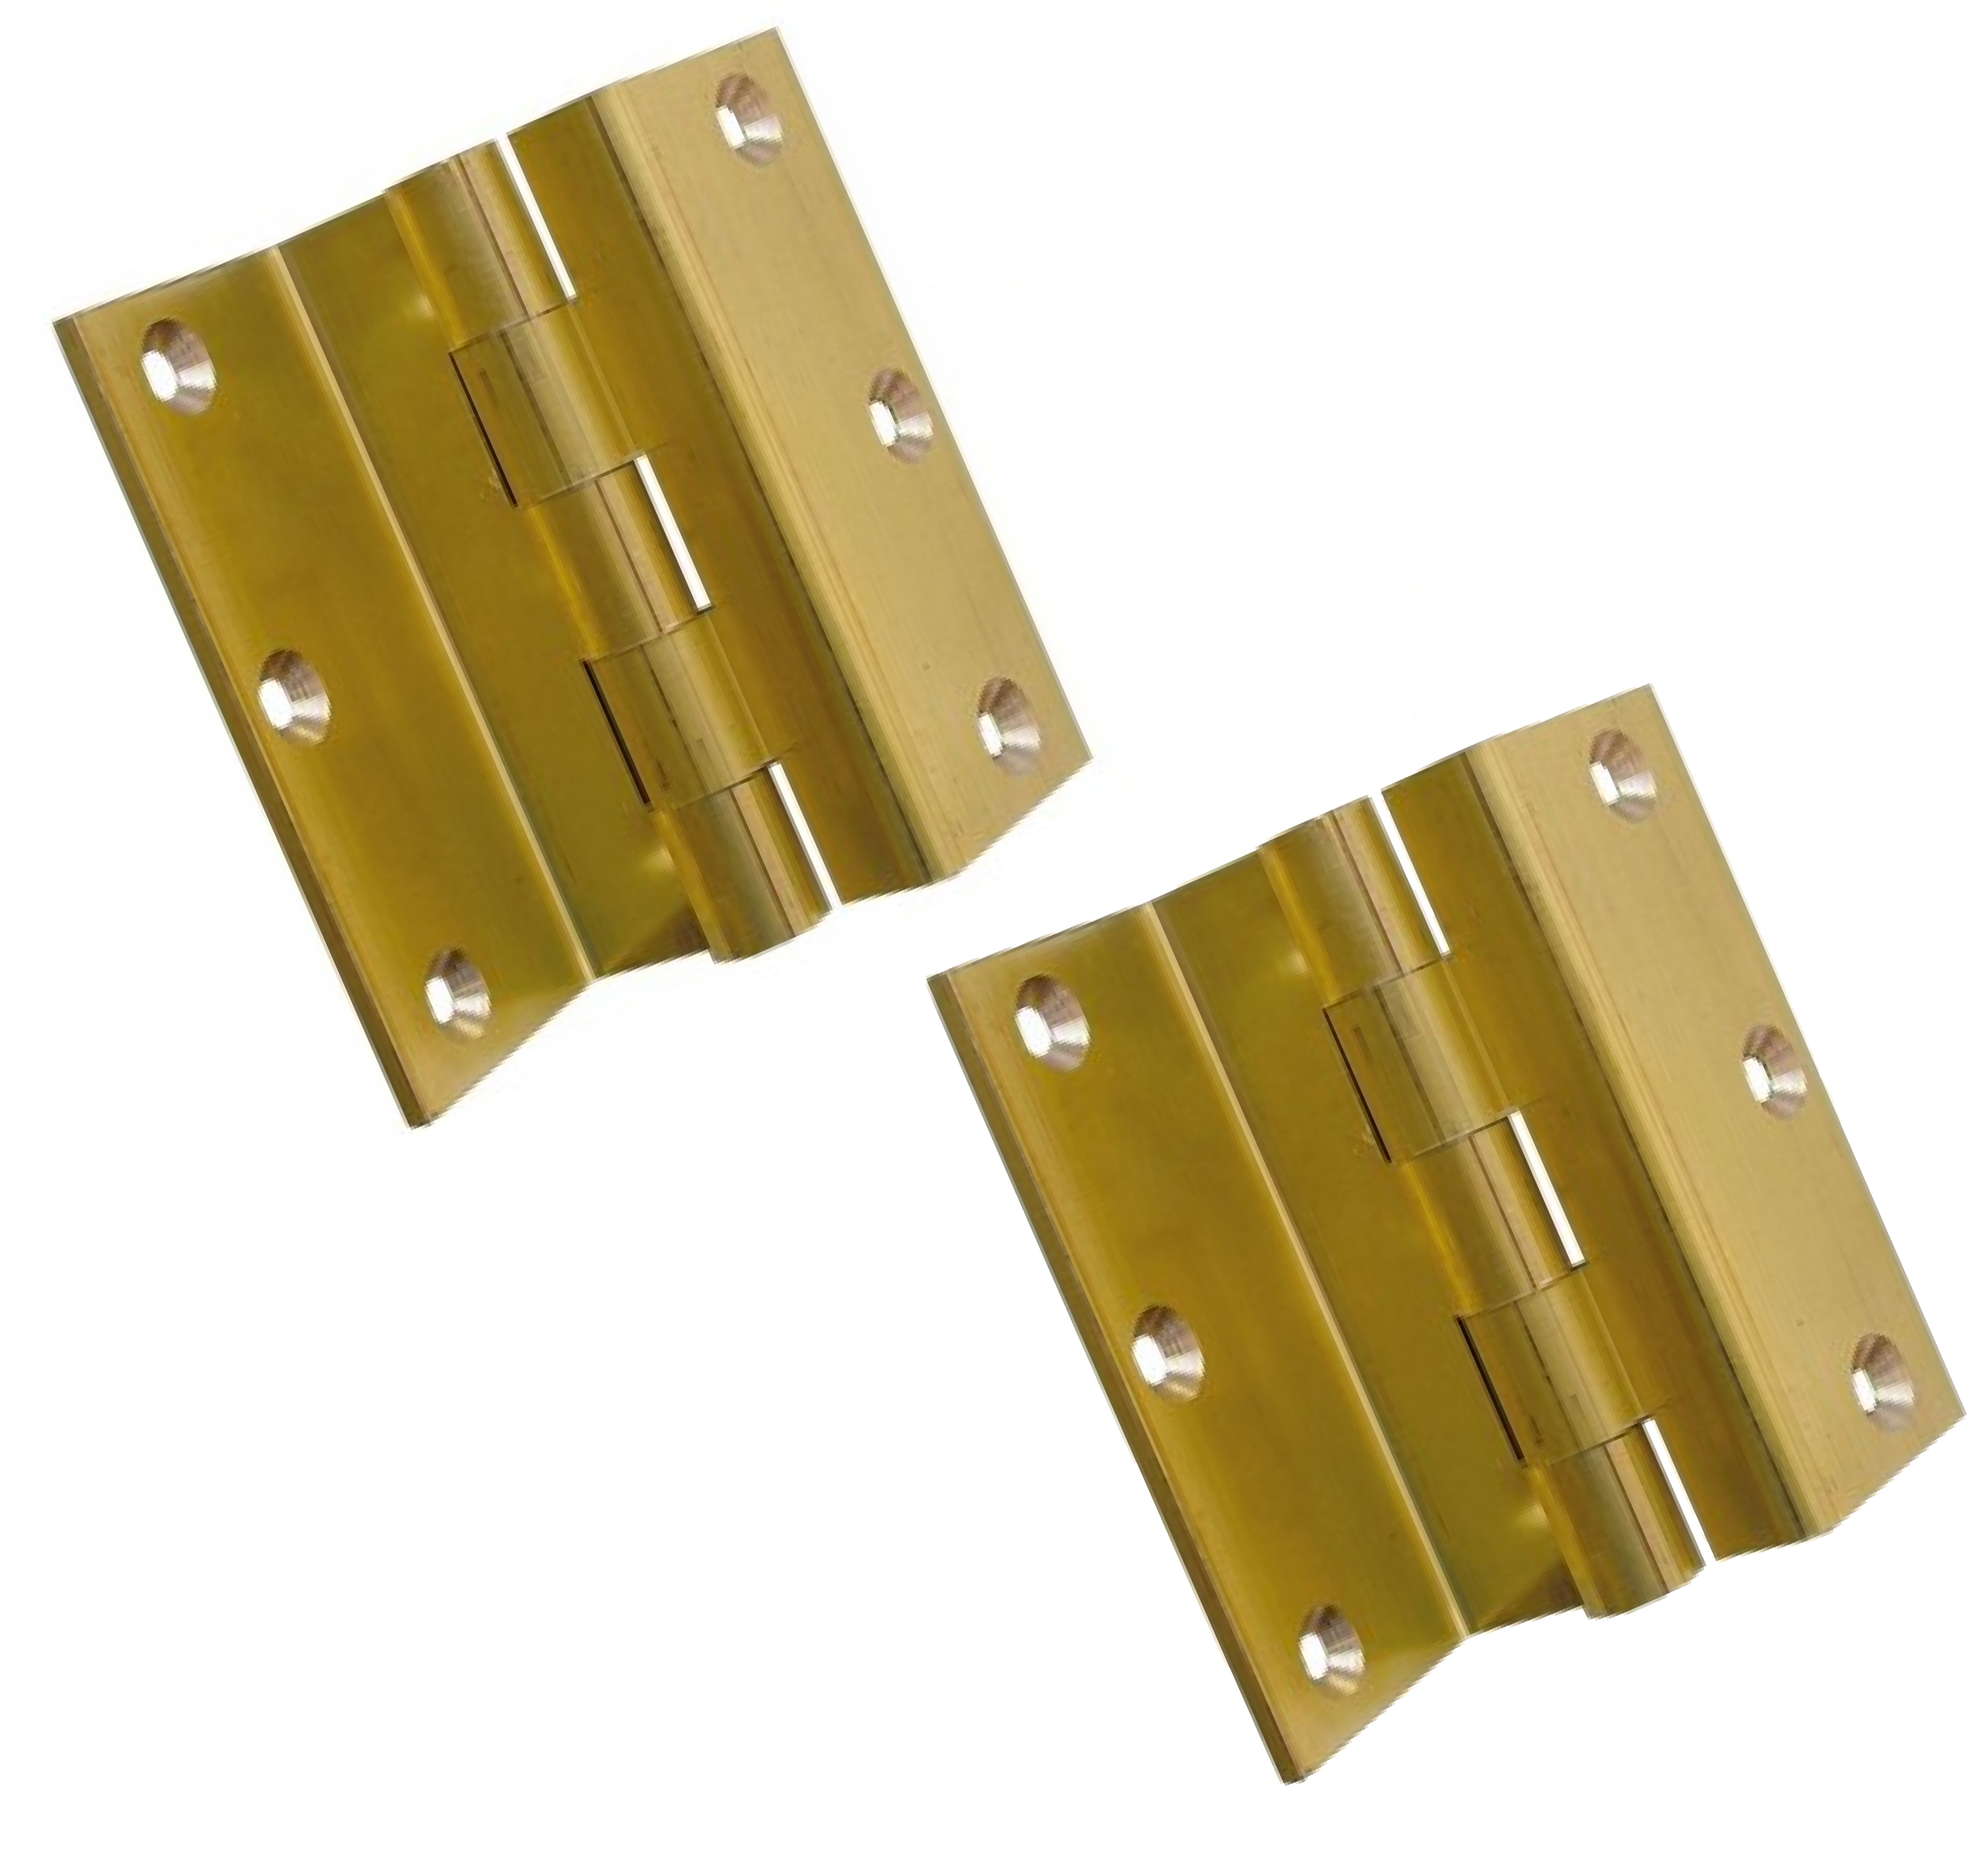 PAIR OF ZINC STORM PROOF HINGES FOR WINDOW SHUTTERS HEAVY DUTY Cranked 2.5" 63mm 